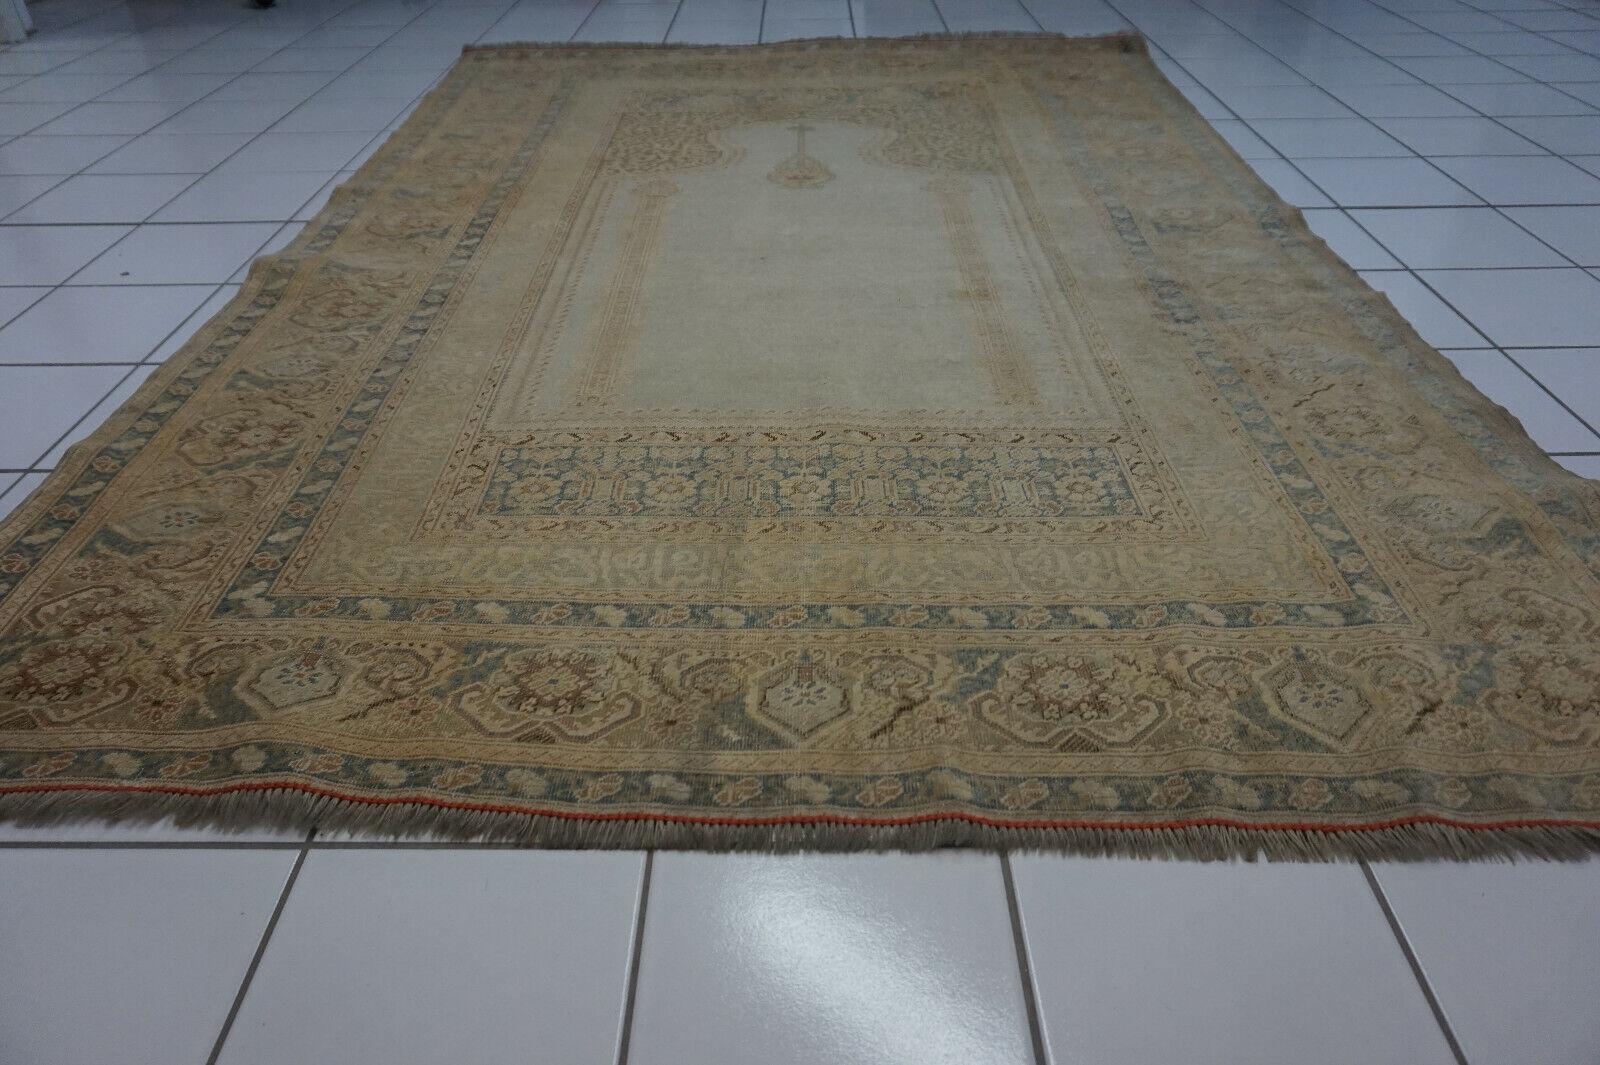 Hand-Knotted Handmade Antique Turkish Transilvania Prayer Rug 4.2' x 6.2', 1880s - 1D65 For Sale